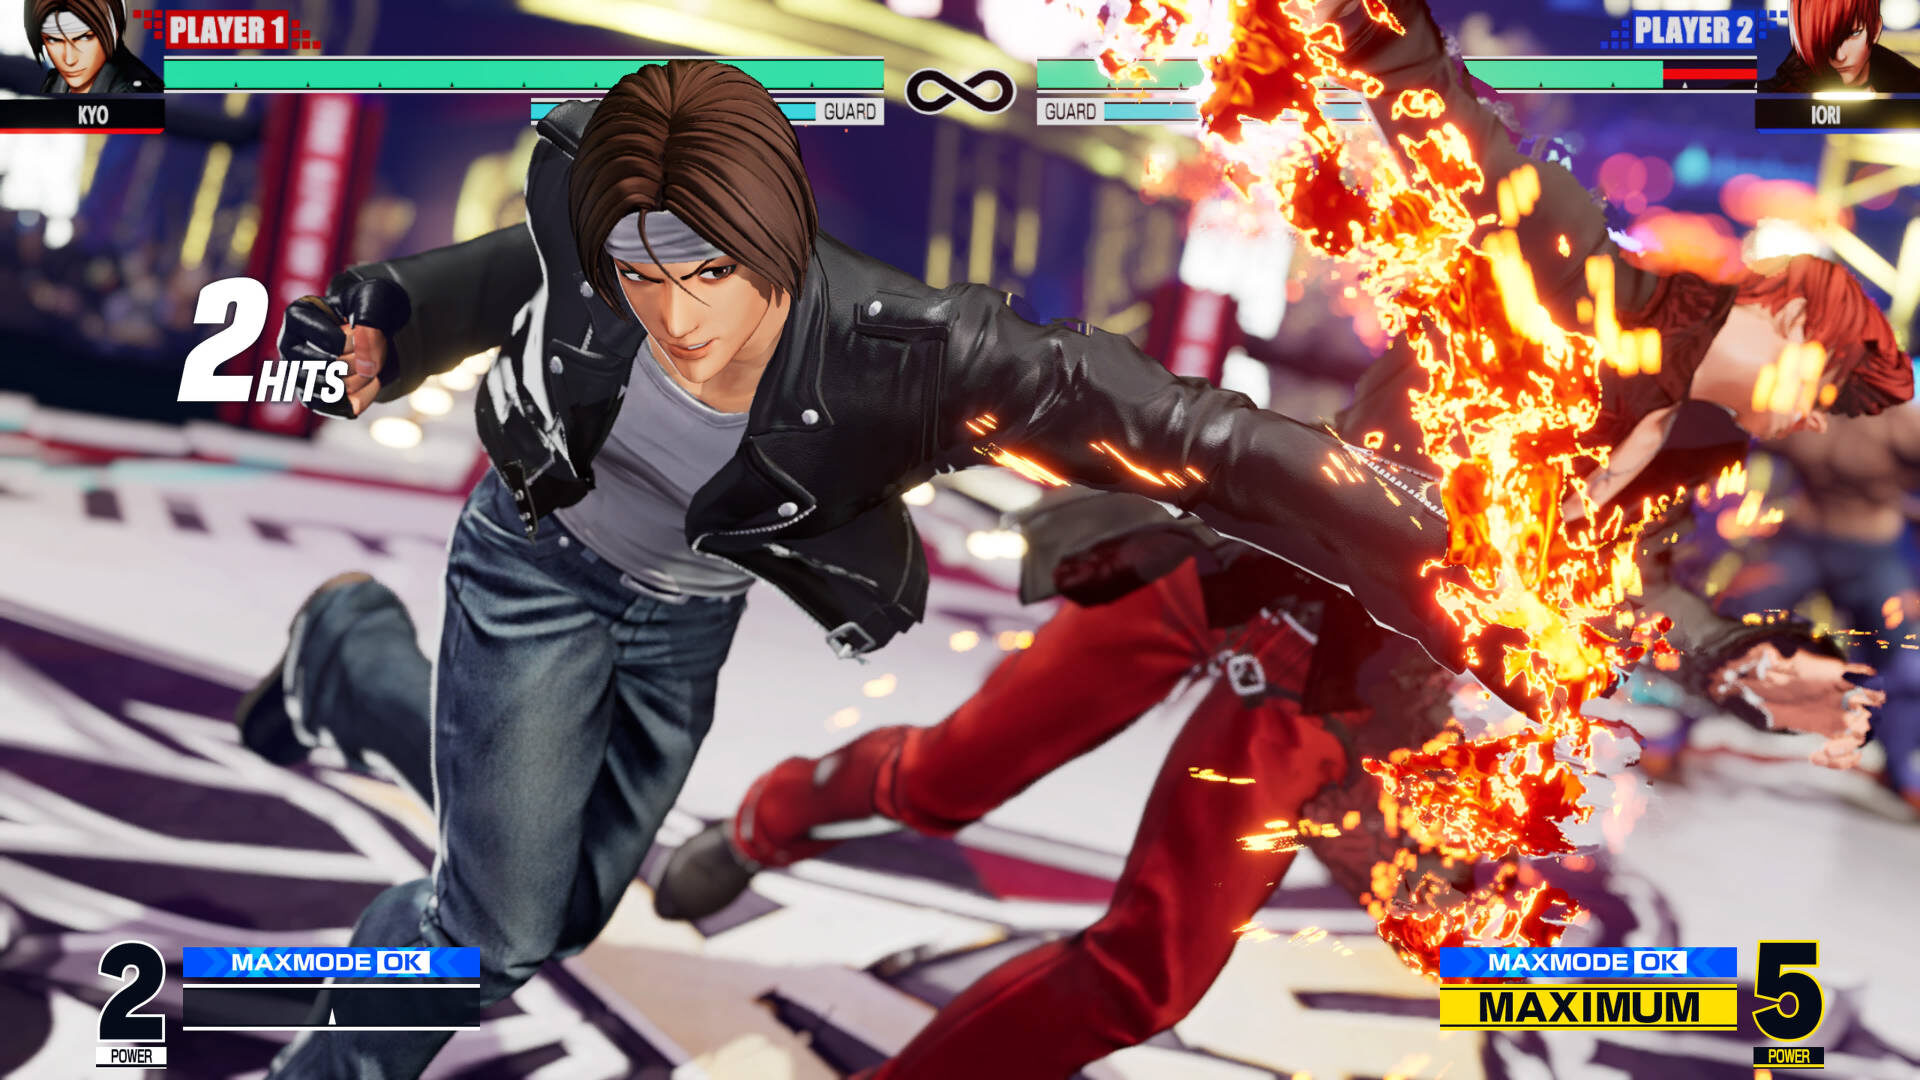 The King of Fighters XV - Review — Analog Stick Gaming